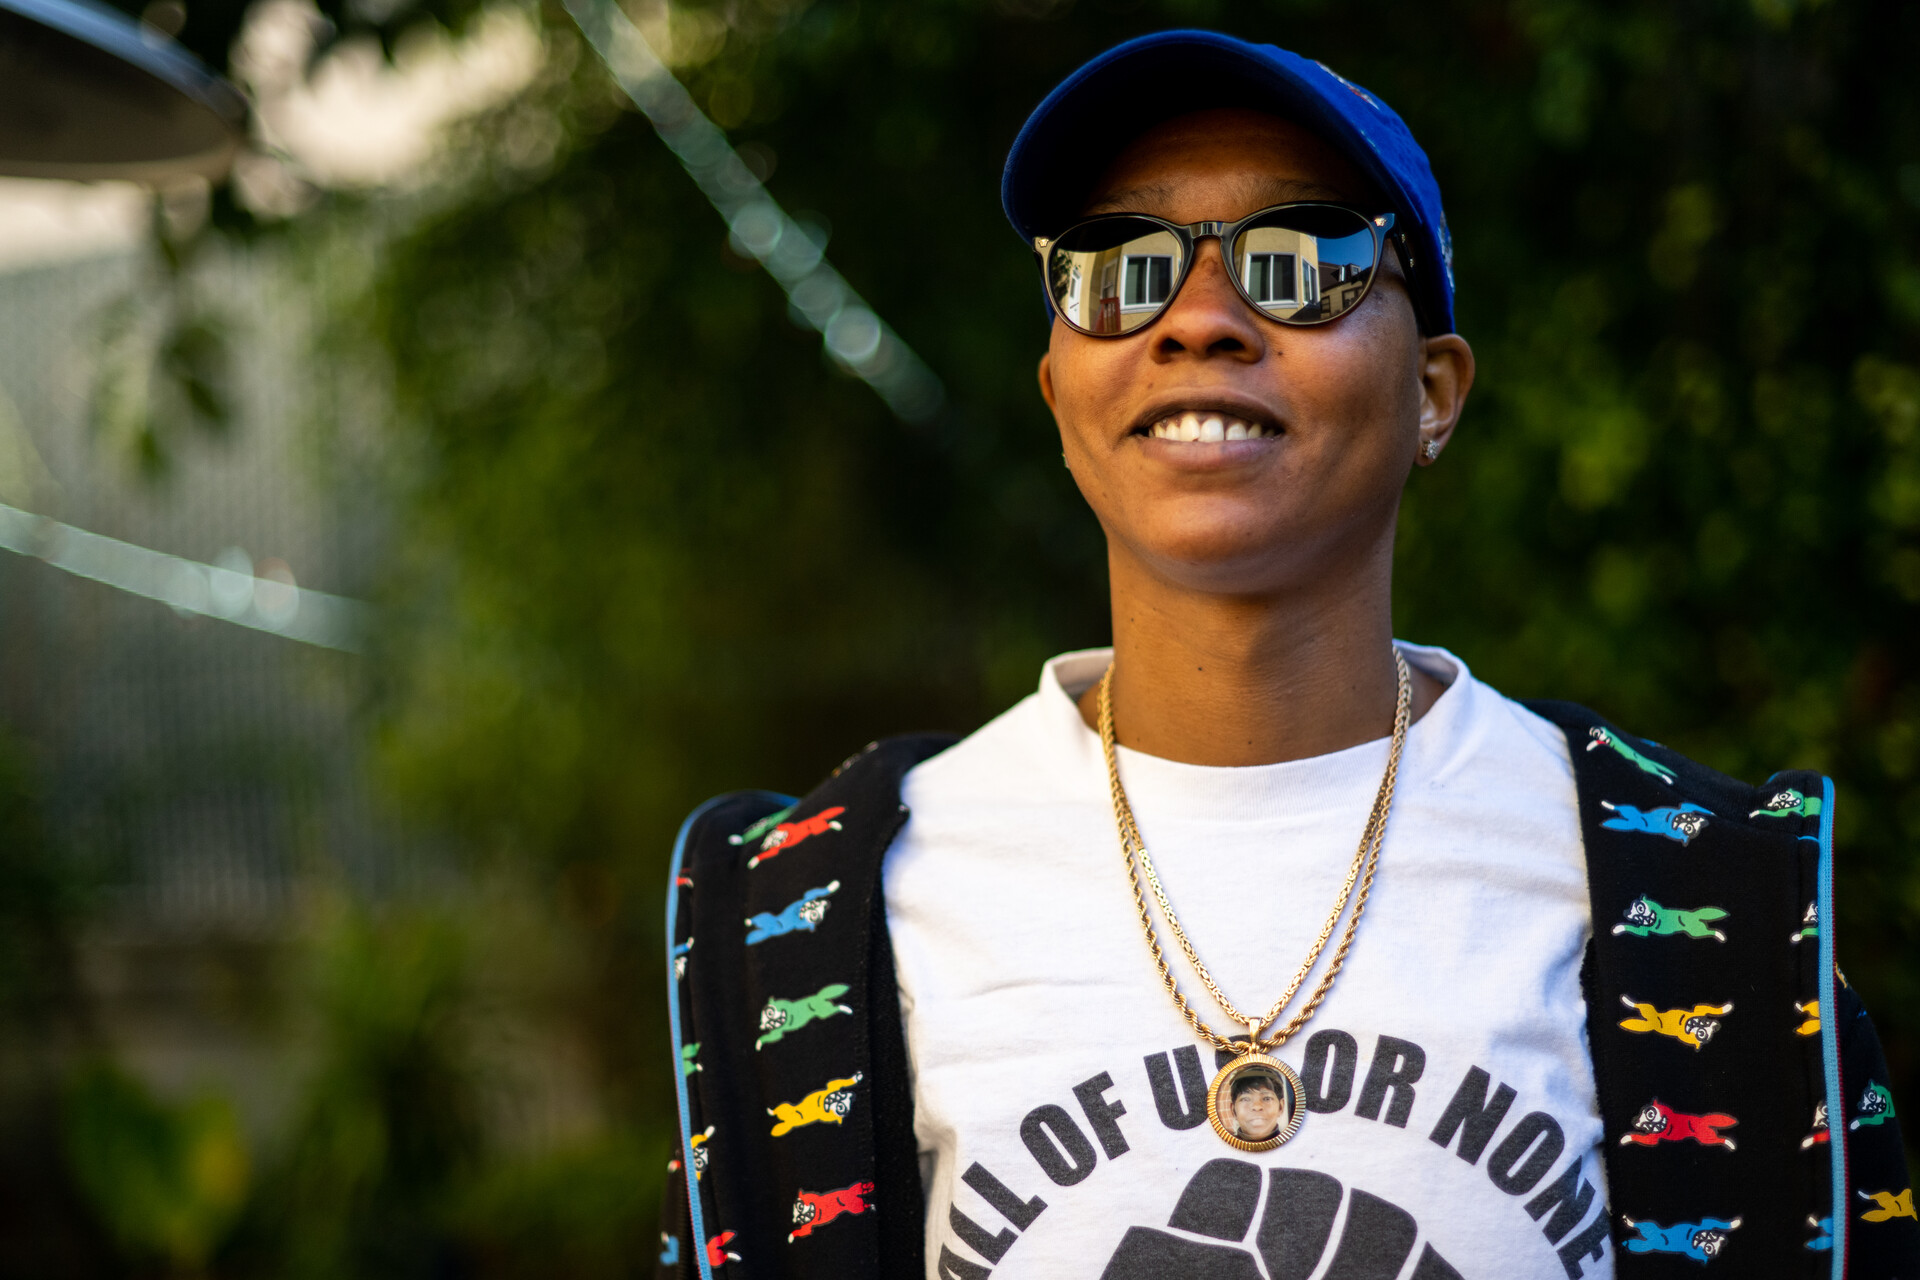 A Black woman with a white shirt that reads "All of Us or None" and sunglasses with her house reflected in the lenses, wearing a blue cap and smiling.